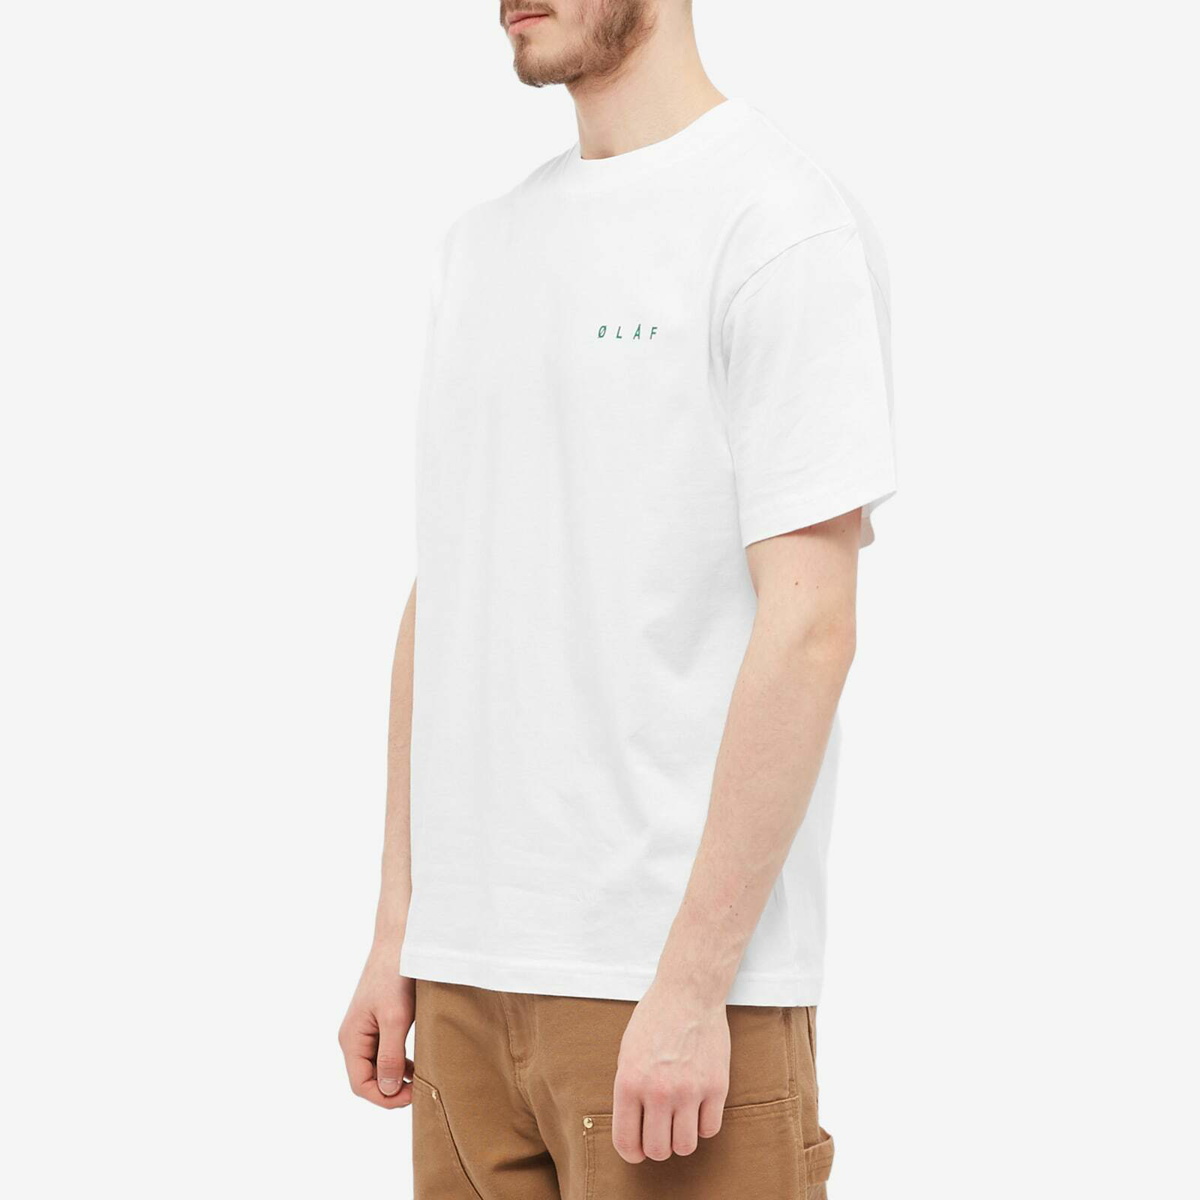 Olaf Hussein Men's Face T-Shirt in Optical White OLAF HUSSEIN